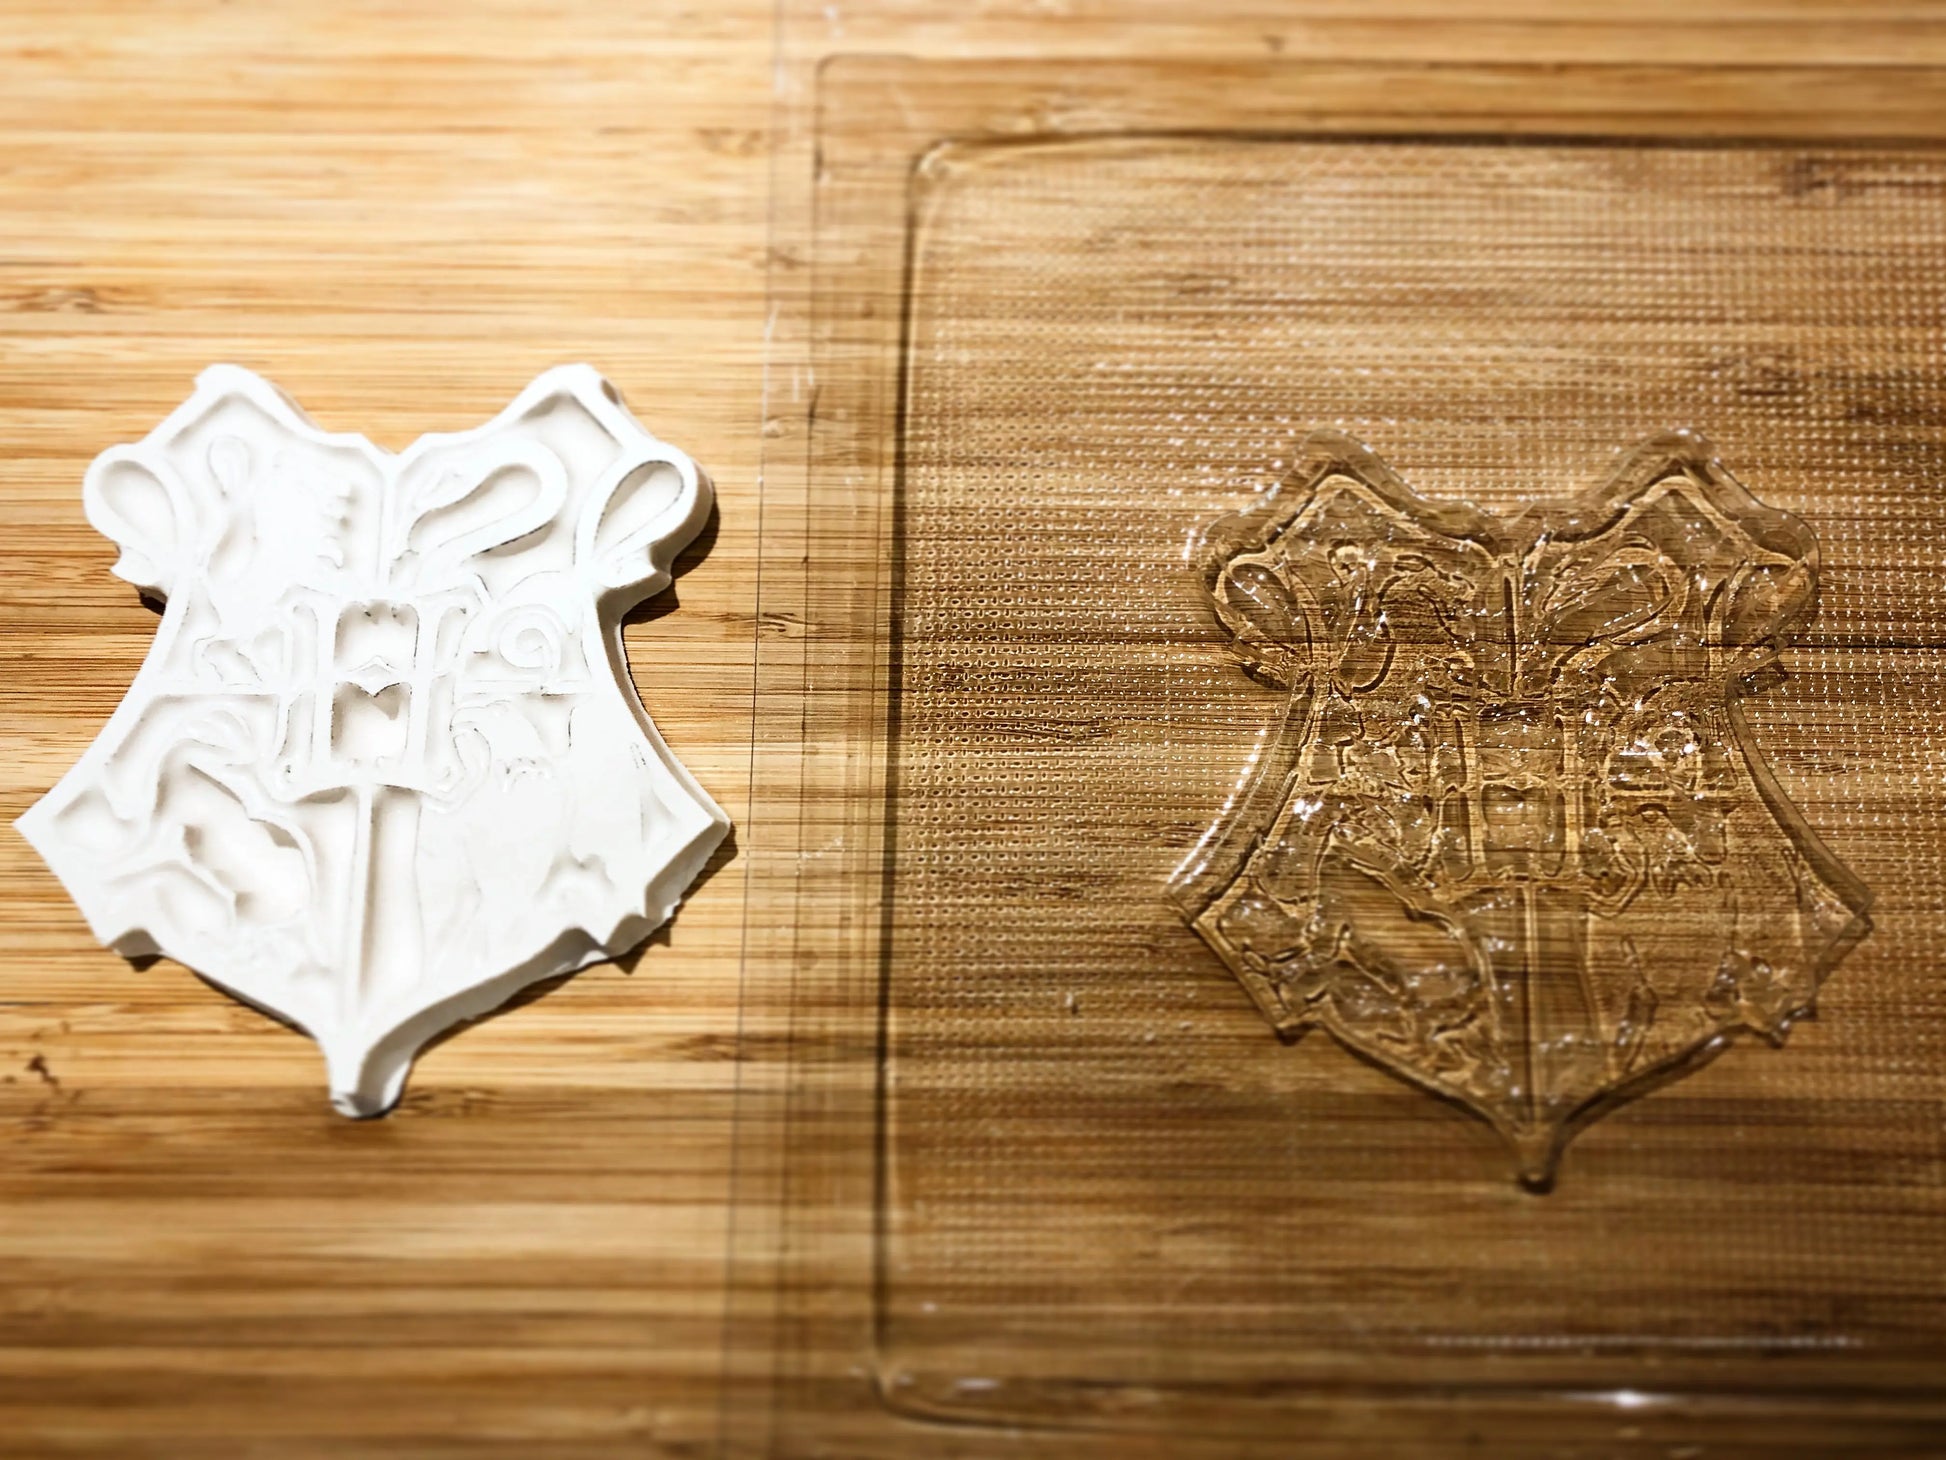 Hogwarts-inspired Harry Potter-inspired chocolate mould MEG cookie cutters